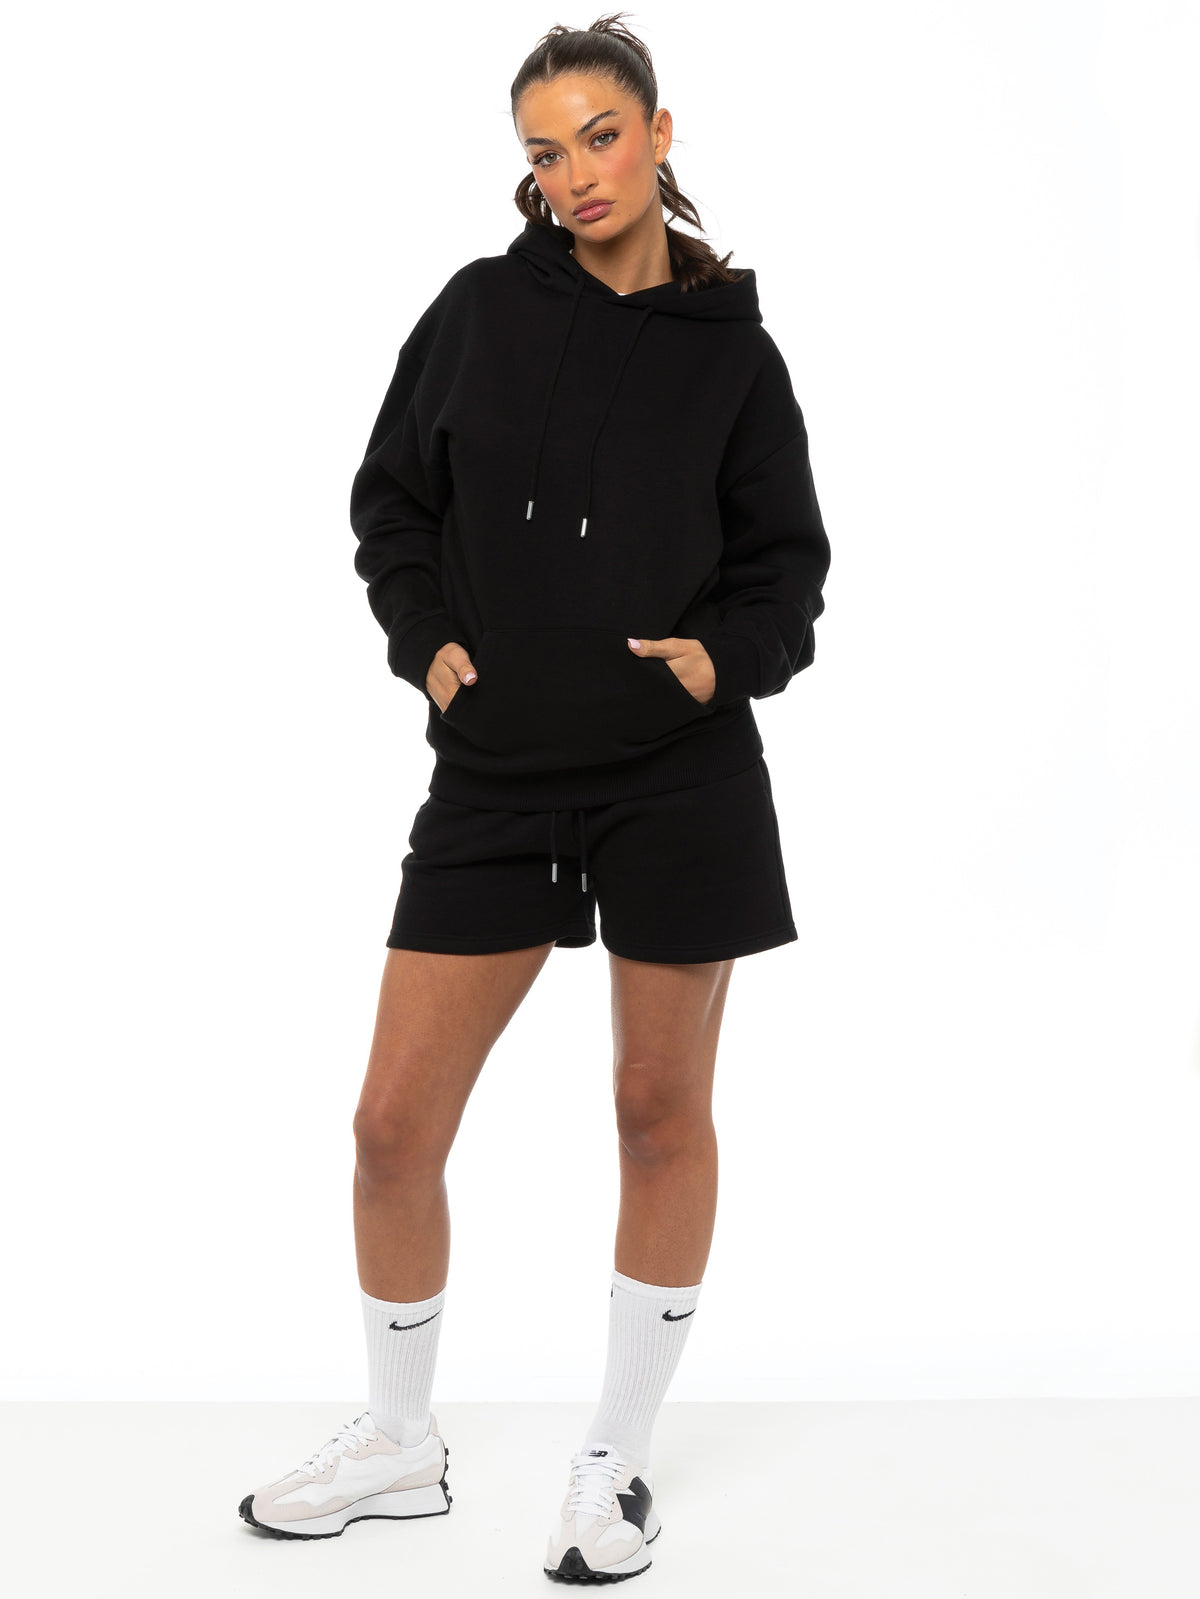 EZLHD587 & EZLS597 Enzo | Womens Oversized Pullover Hoodie Tracksuit Set With Shorts ENZO RAWDENIM